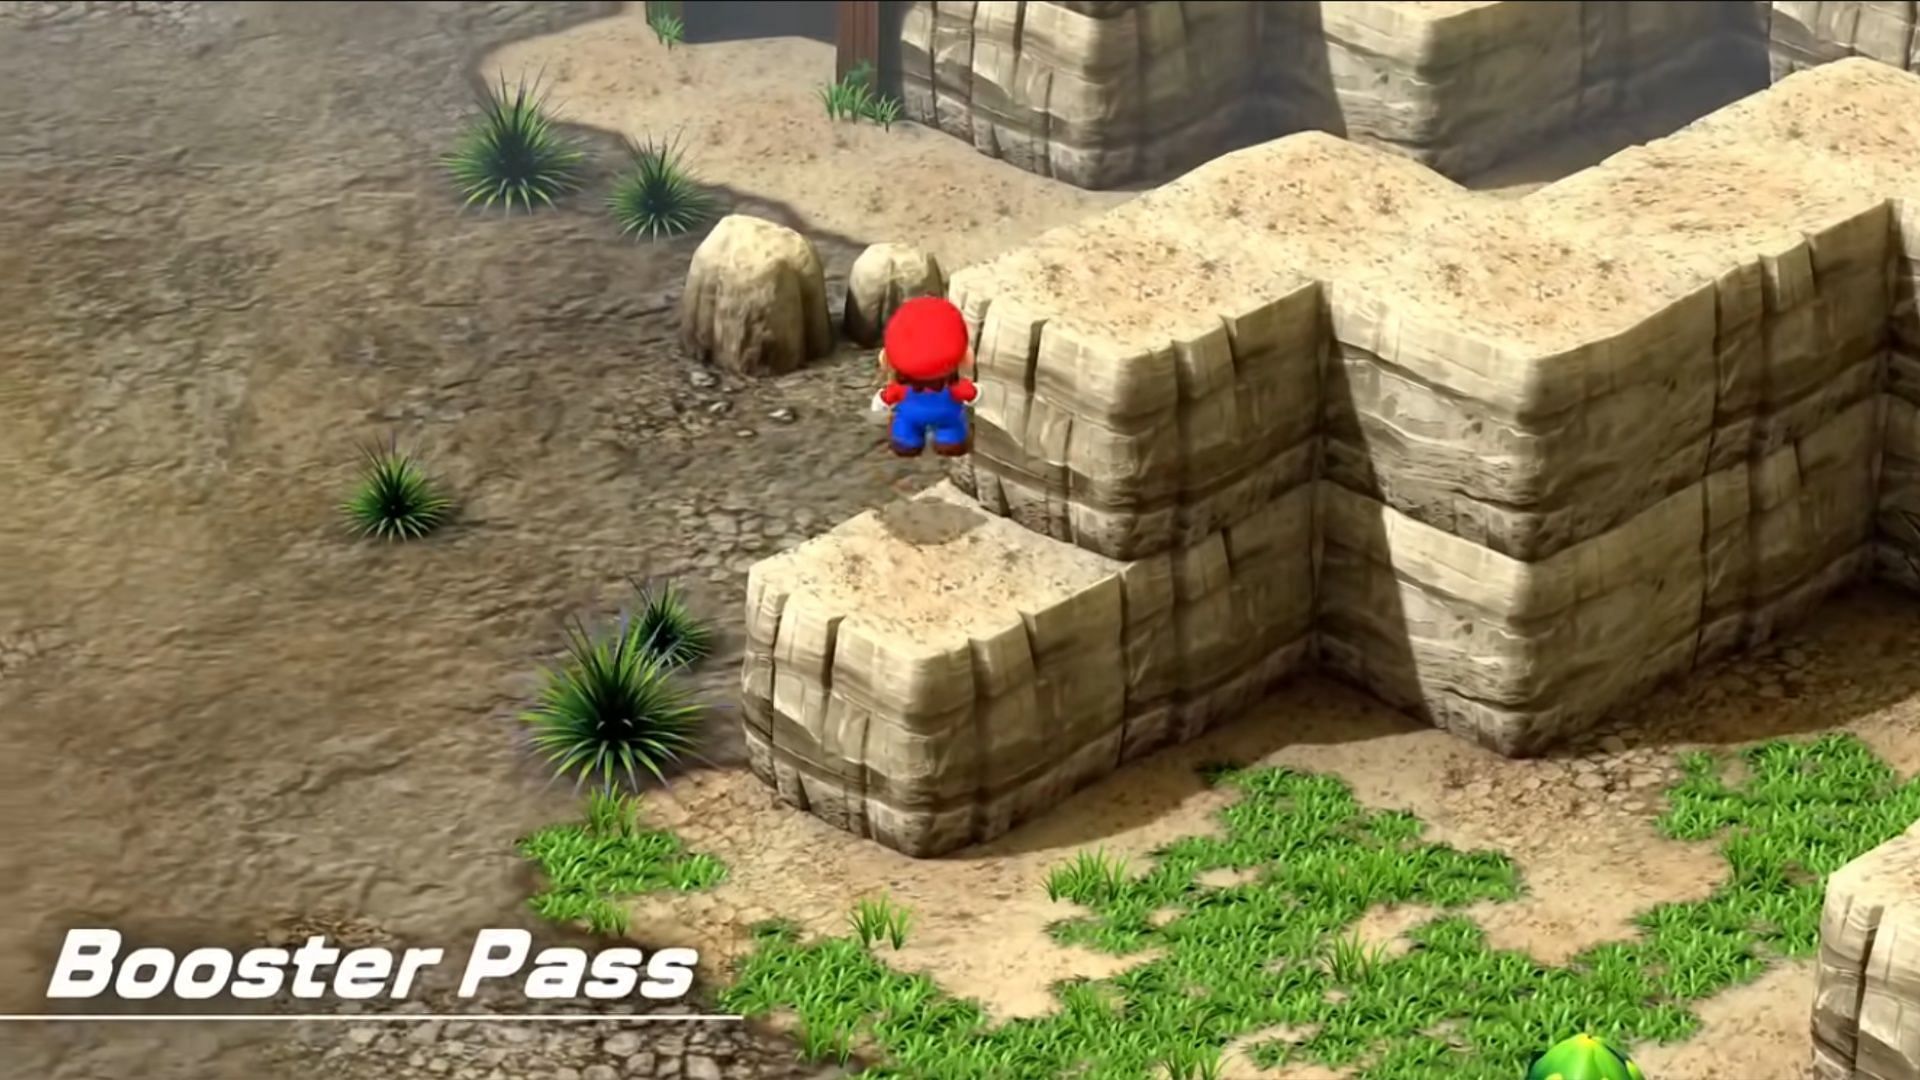 Booster Pass features two hidden items in Super Mario RPG Remake.